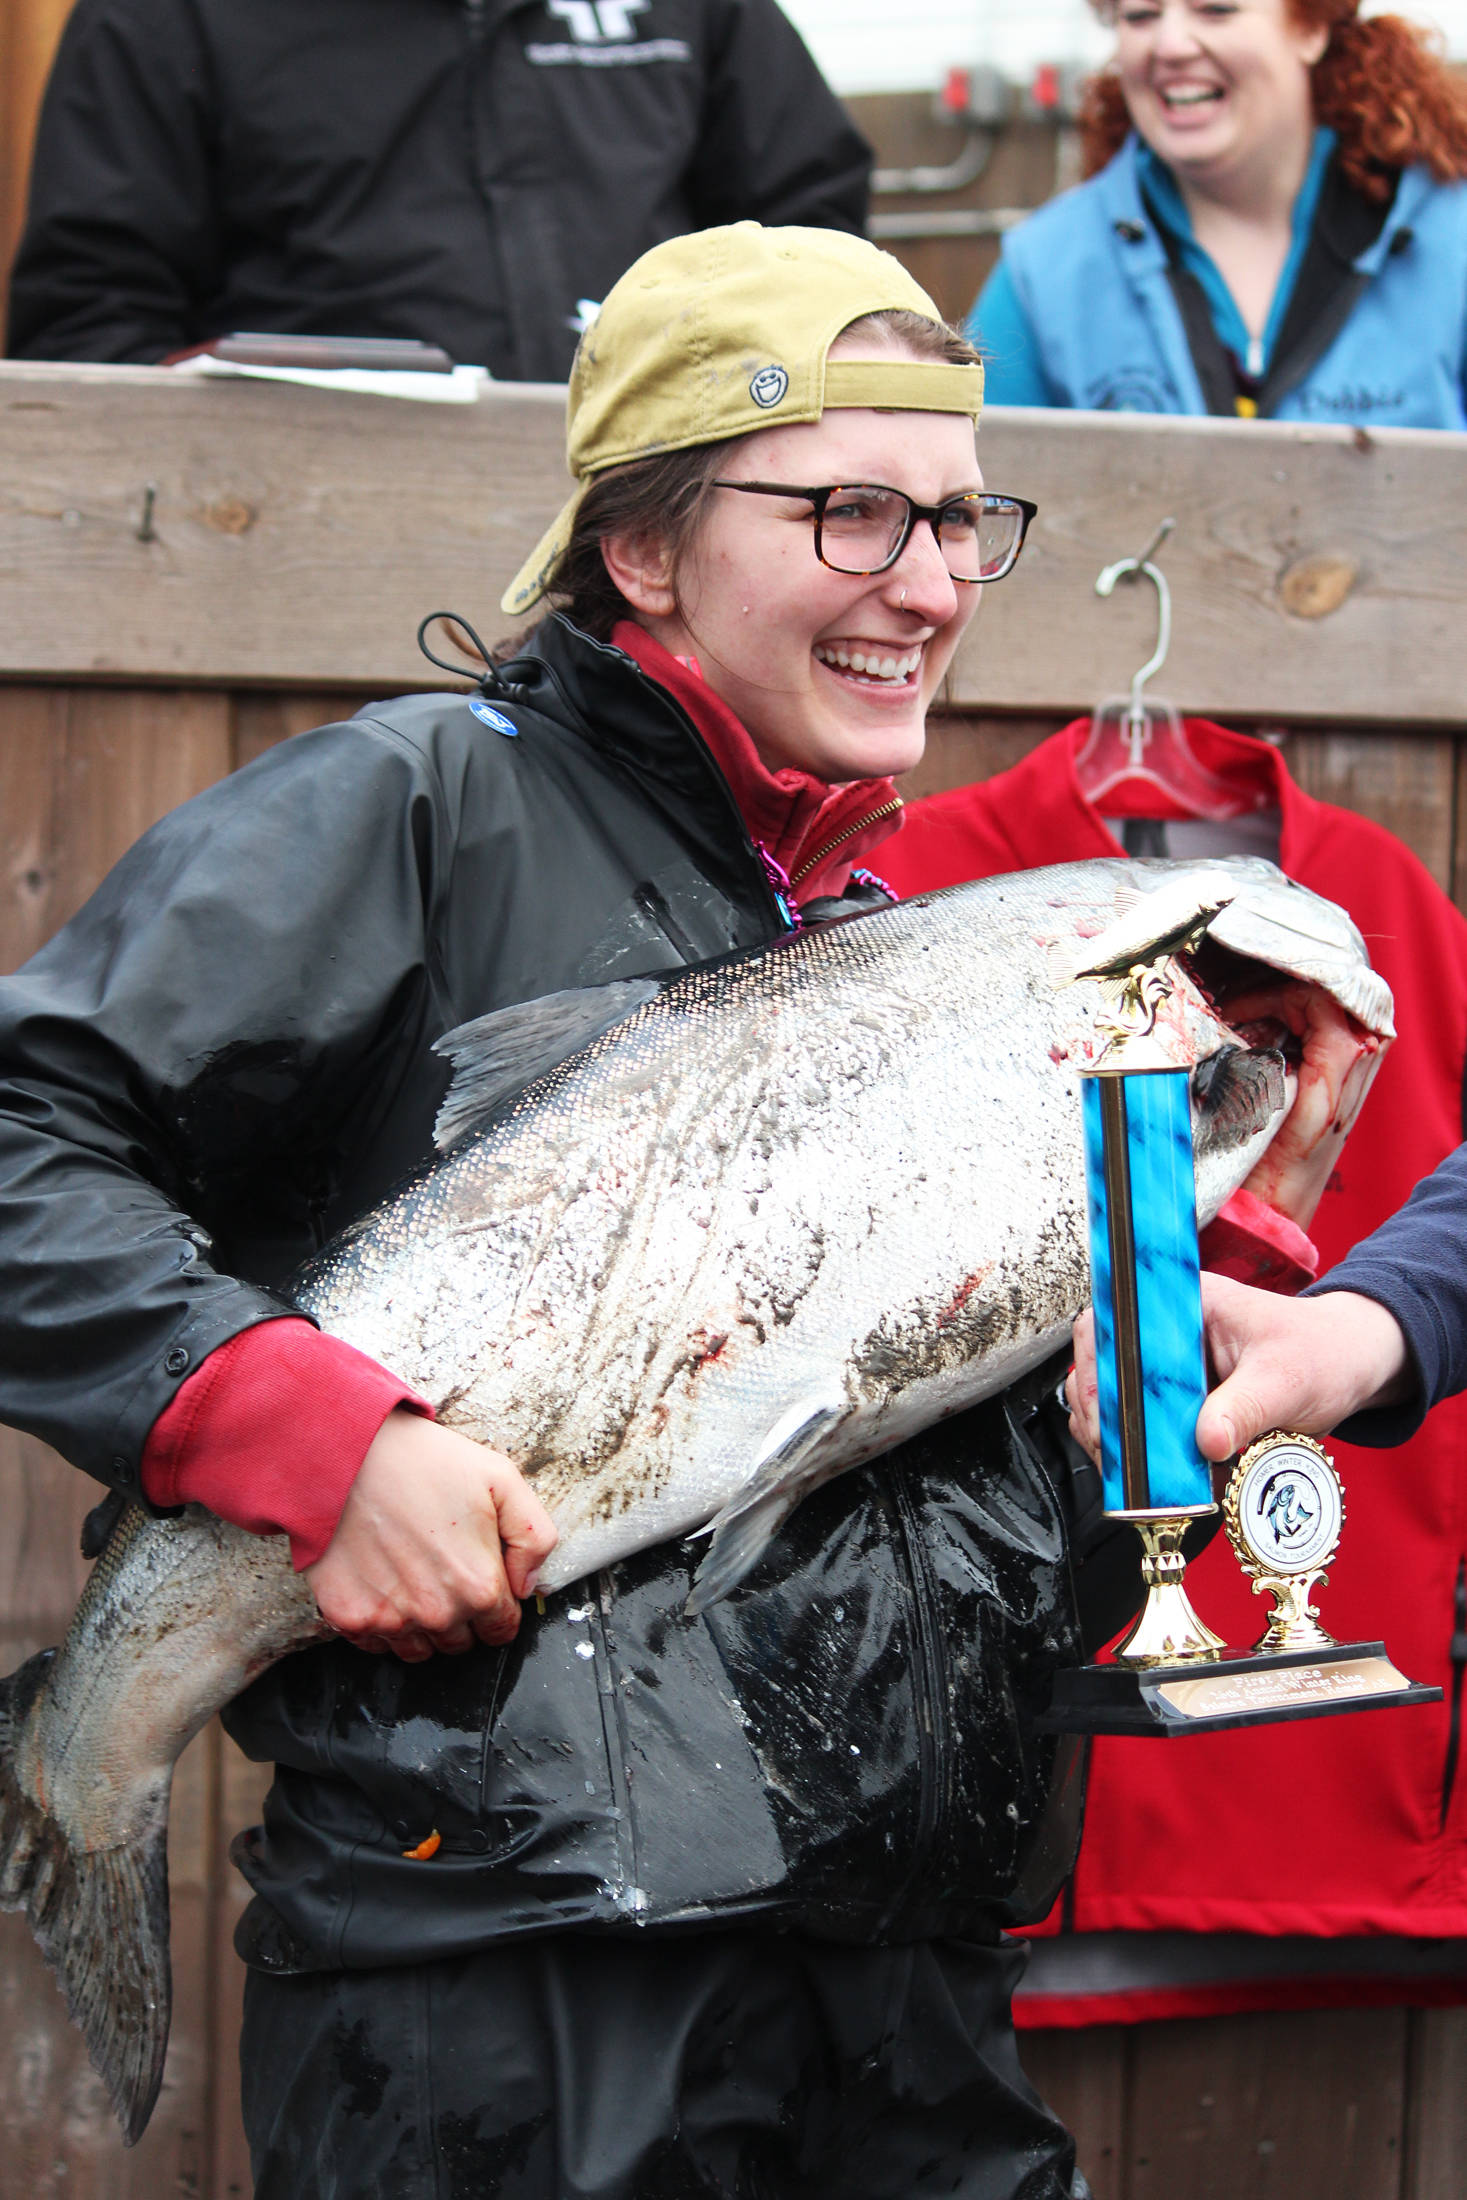 Shayna Perry of Eagle River holds up her 26.7-pound white king salmon while accepting first prize in the Homer Winter King Salmon Tournament on Saturday, March 23, 2019 at Coal Point Seafoods in Homer, Alaska. Perry is the first woman to win the tournament, according to the Homer Chamber of Commerce and Visitor Center. (Photo by Megan Pacer/Homer News)